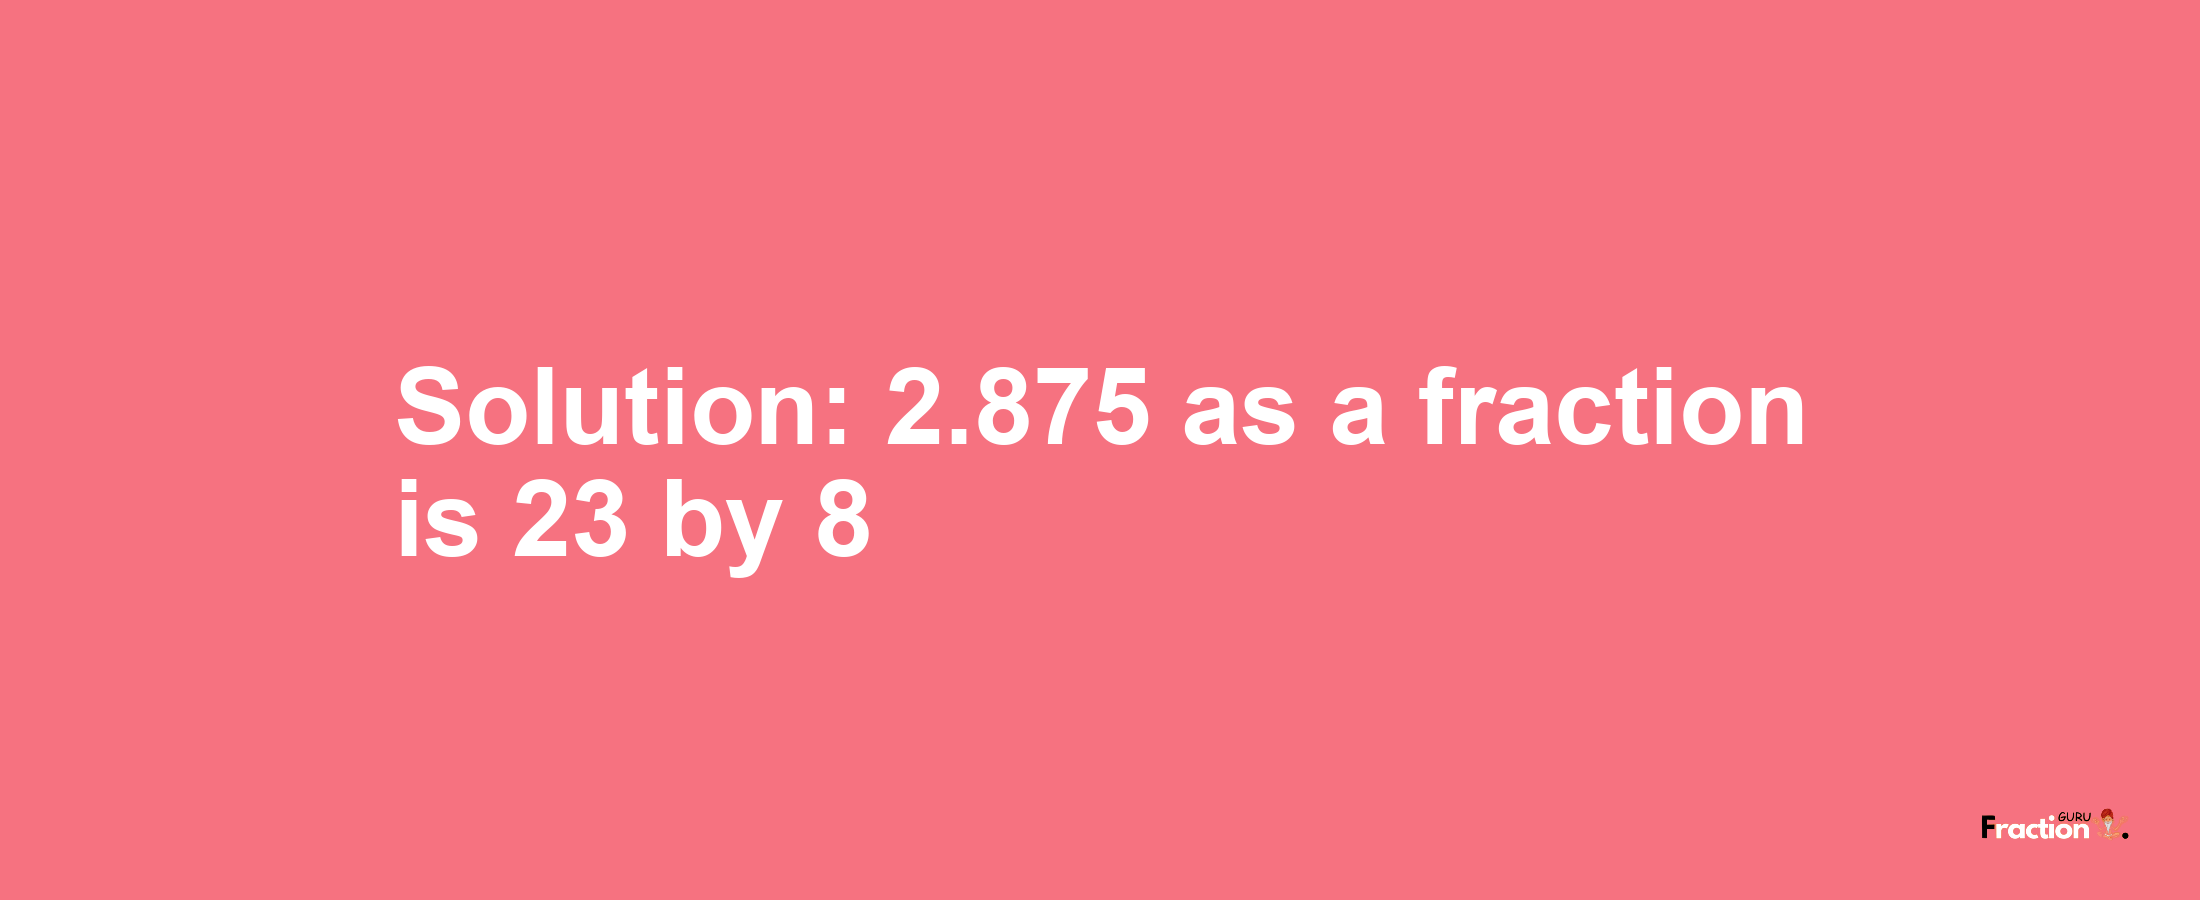 Solution:2.875 as a fraction is 23/8